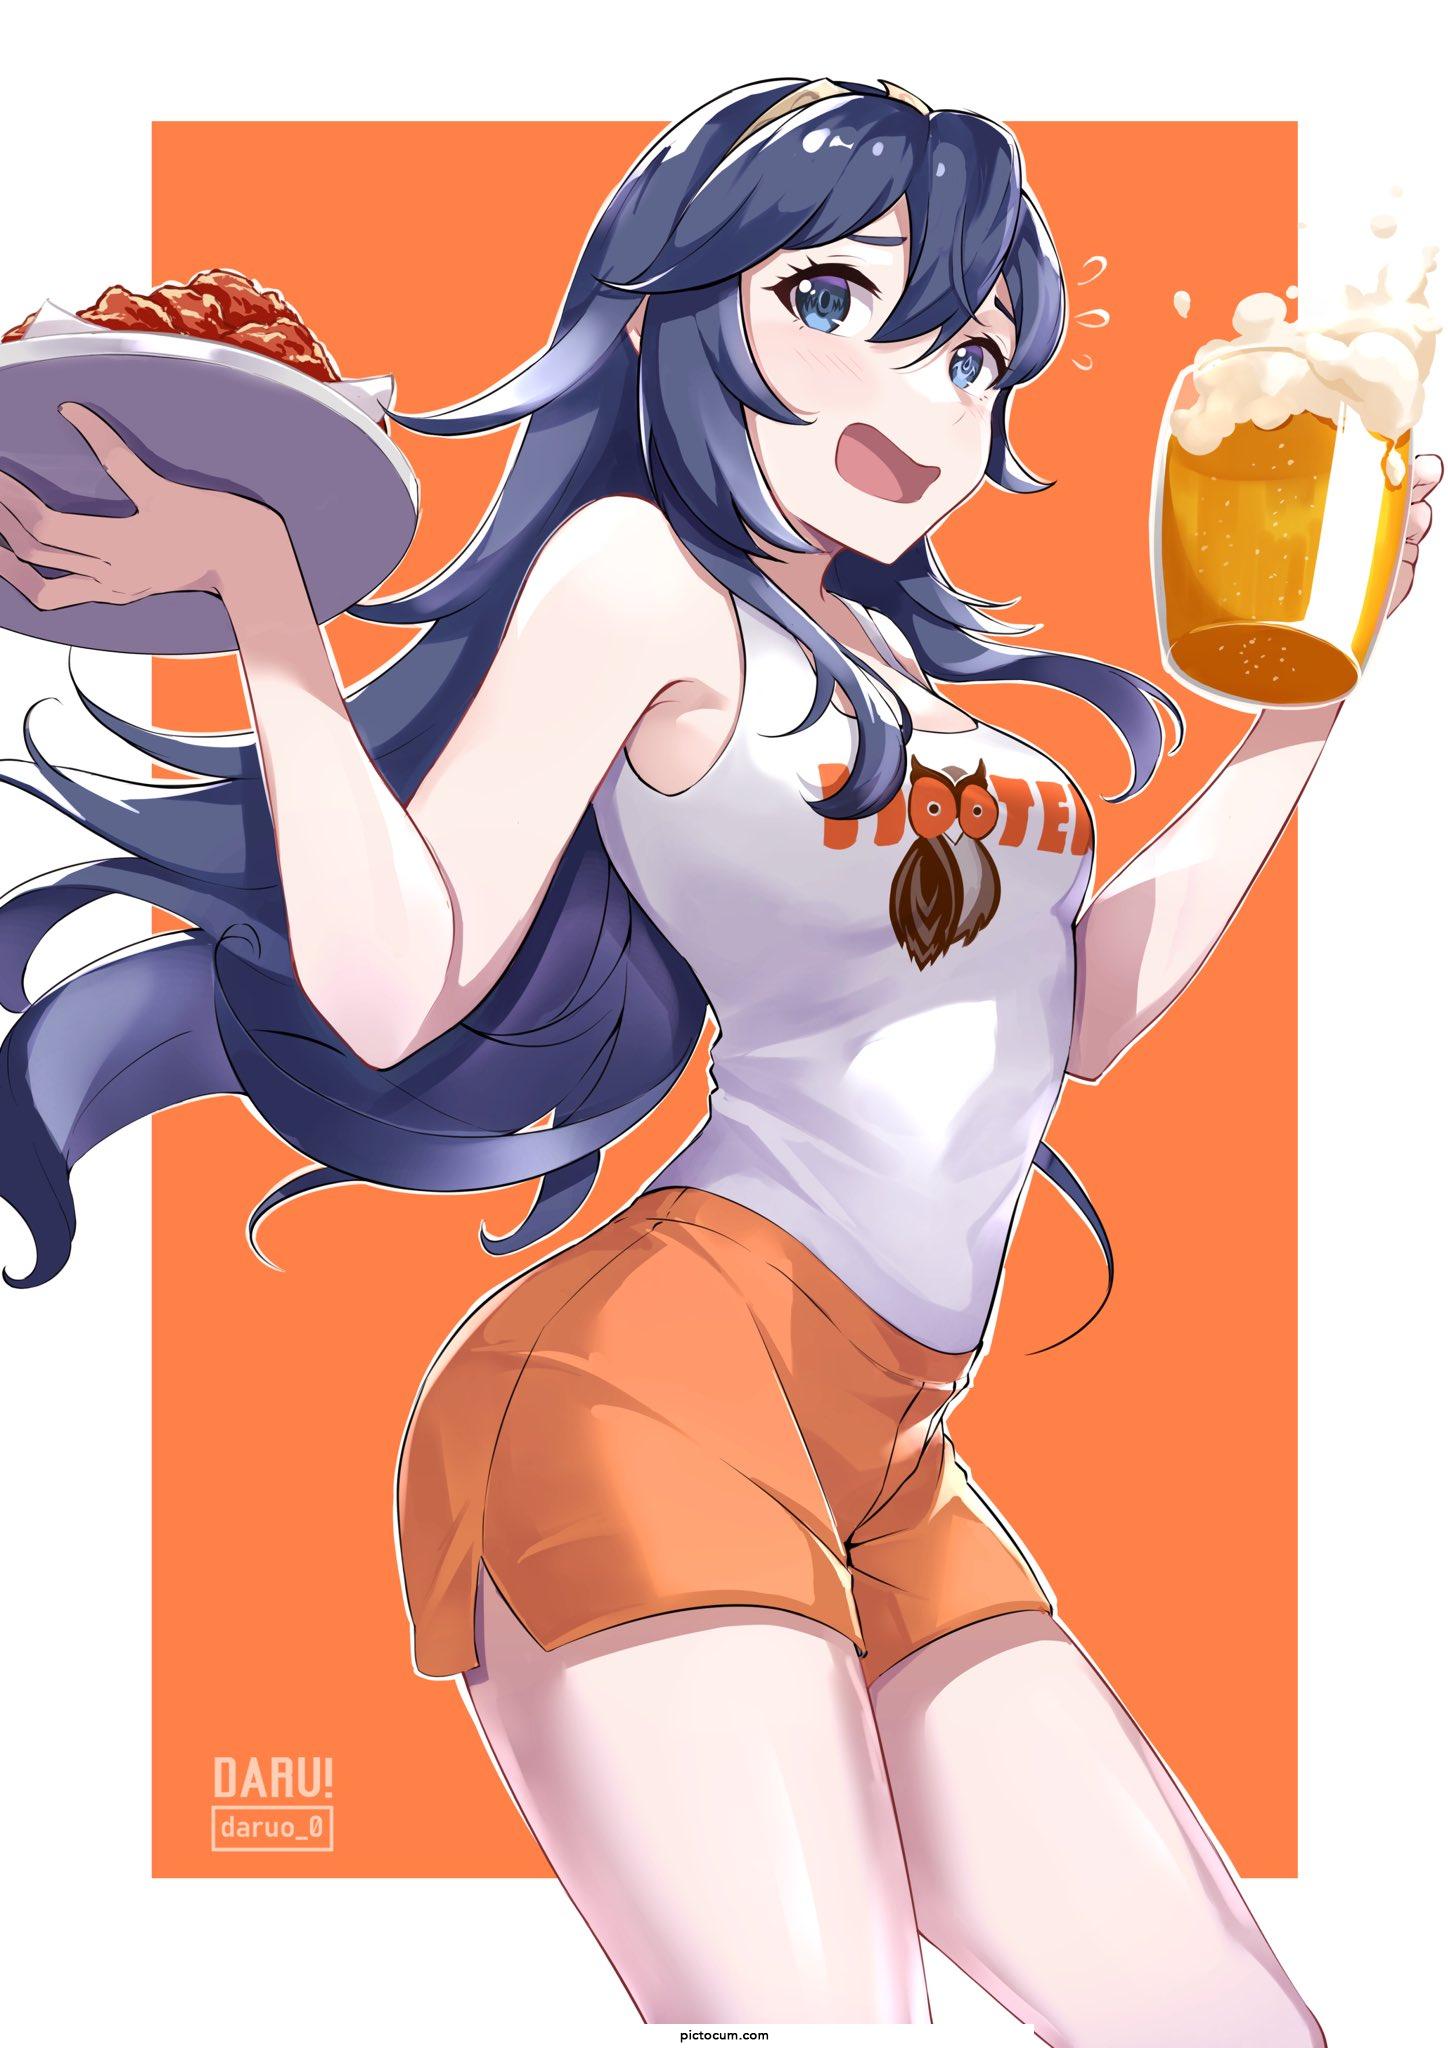 Lucina x Hooters